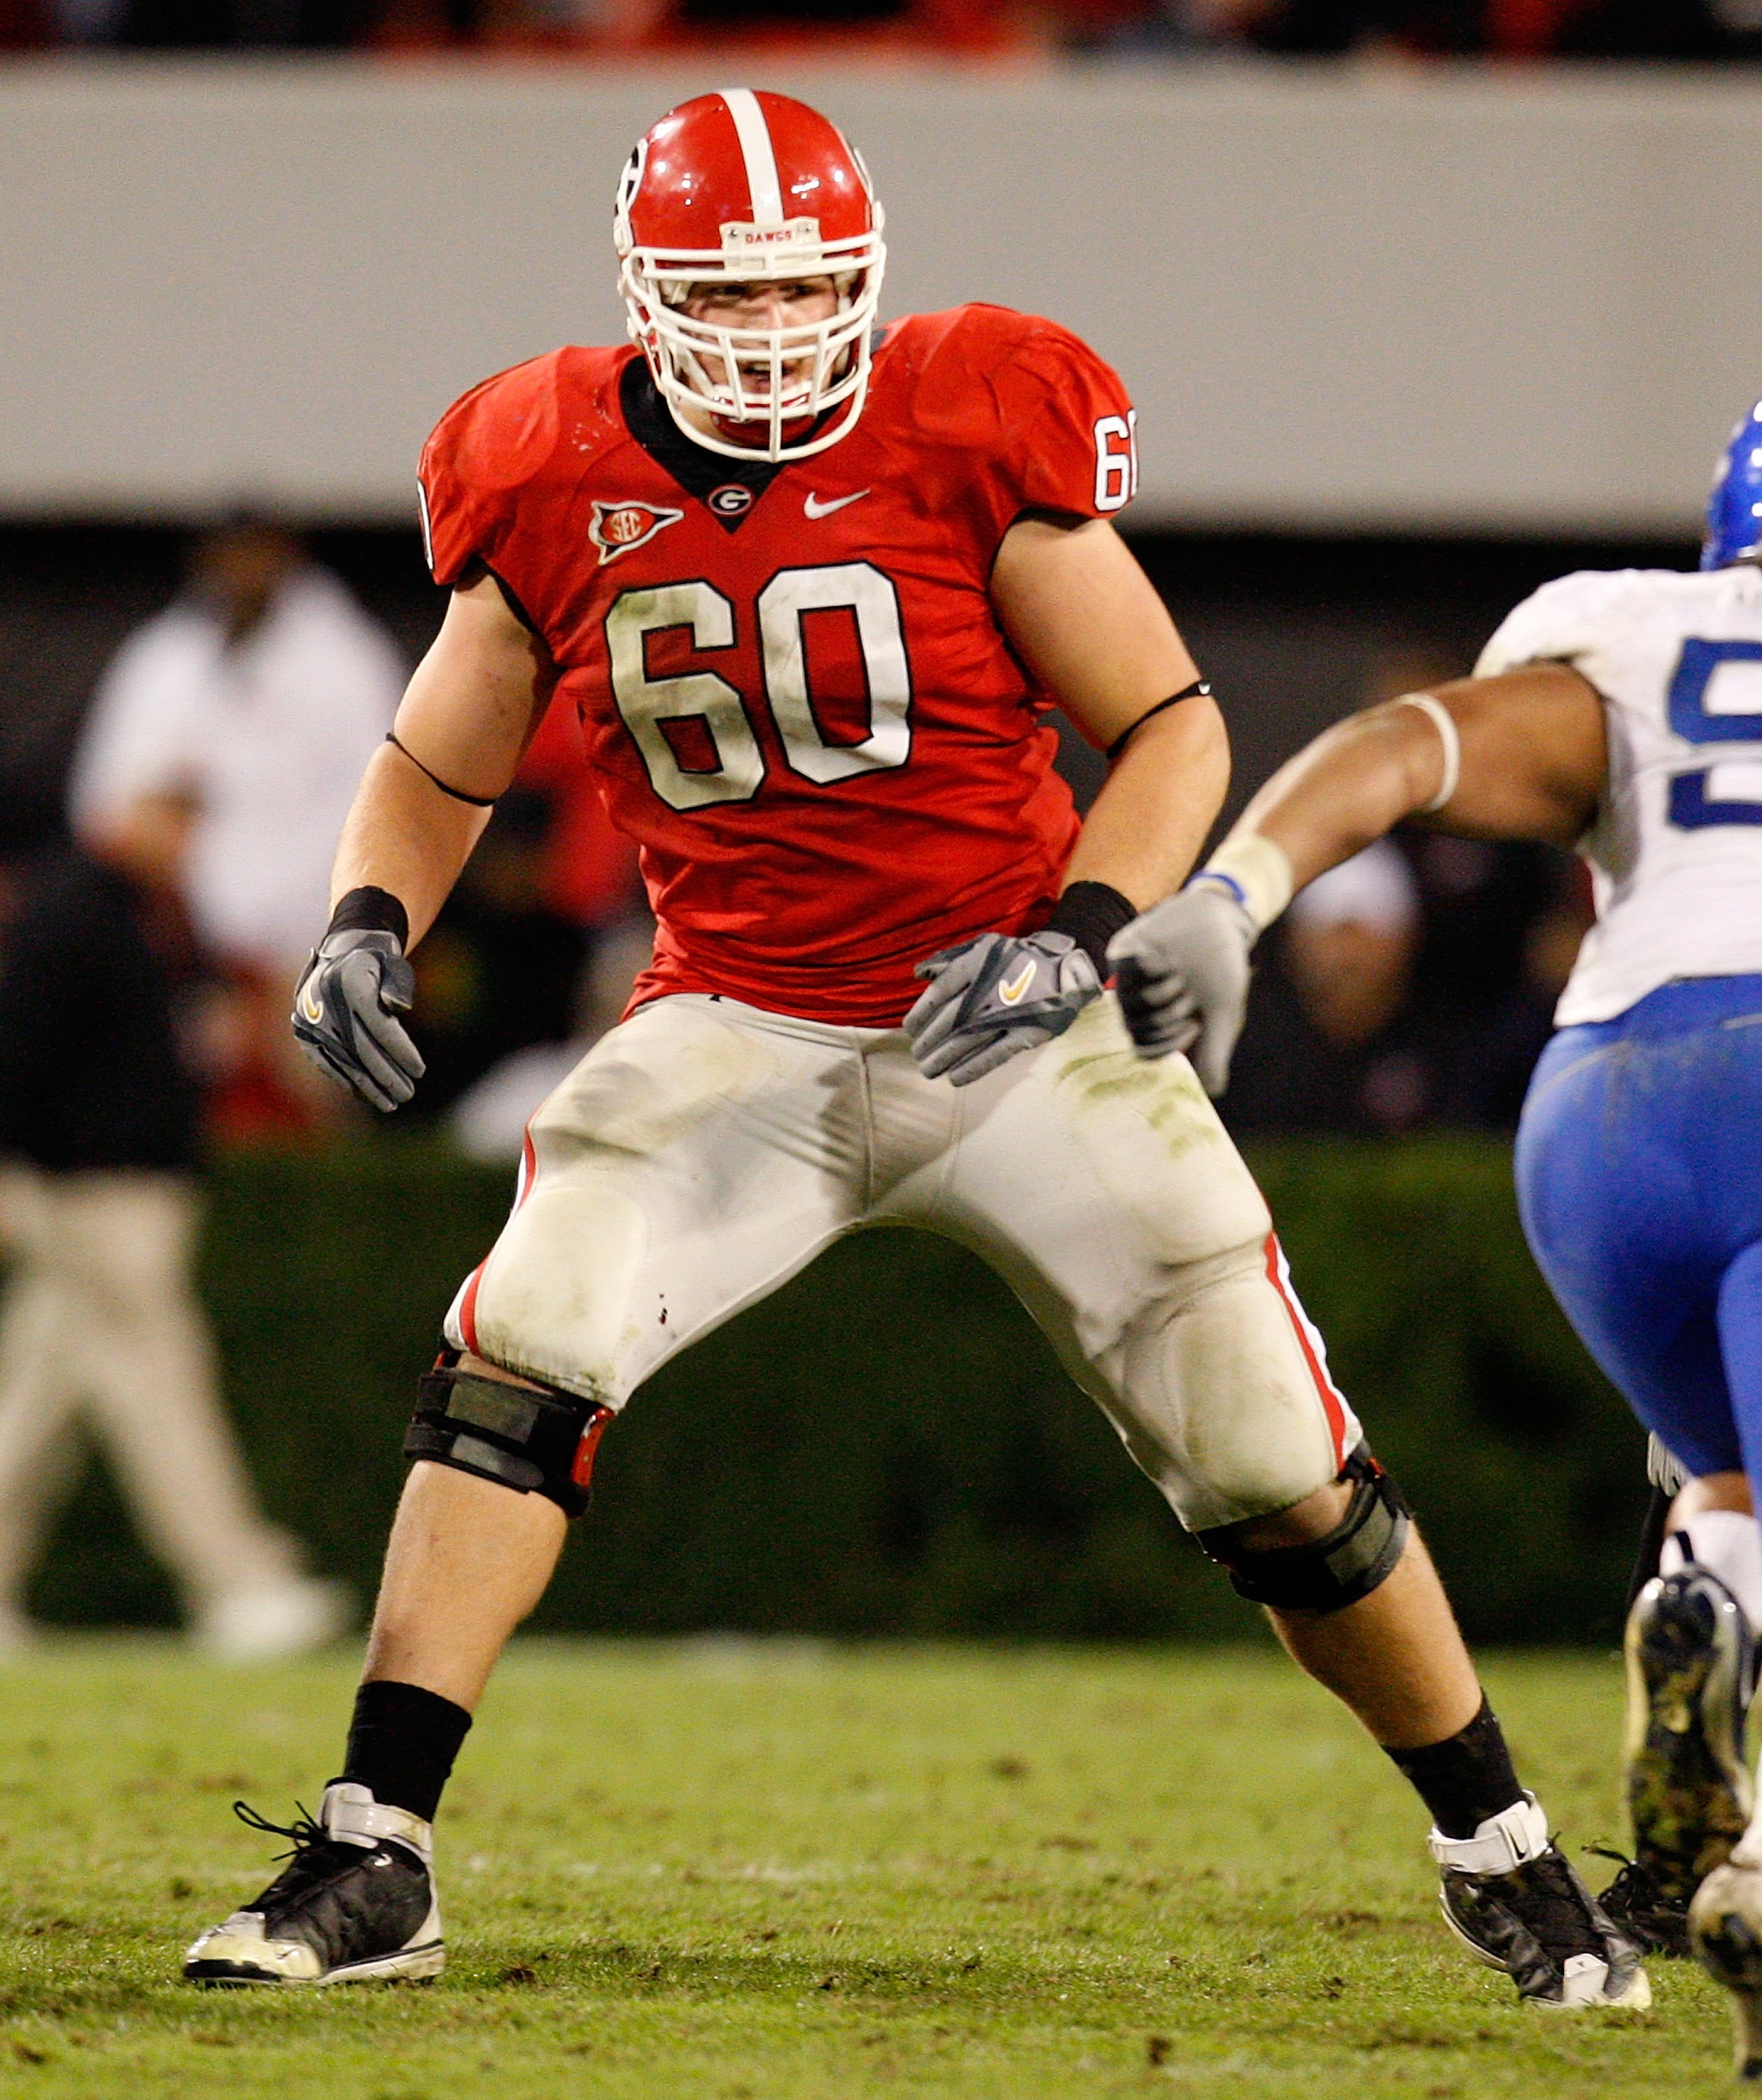 ATHENS, GA - NOVEMBER 21:  Clint Boling #60 of the Georgia Bulldogs against the Kentucky Wildcats at Sanford Stadium on November 21, 2009 in Athens, Georgia.  (Photo by Kevin C. Cox/Getty Images)